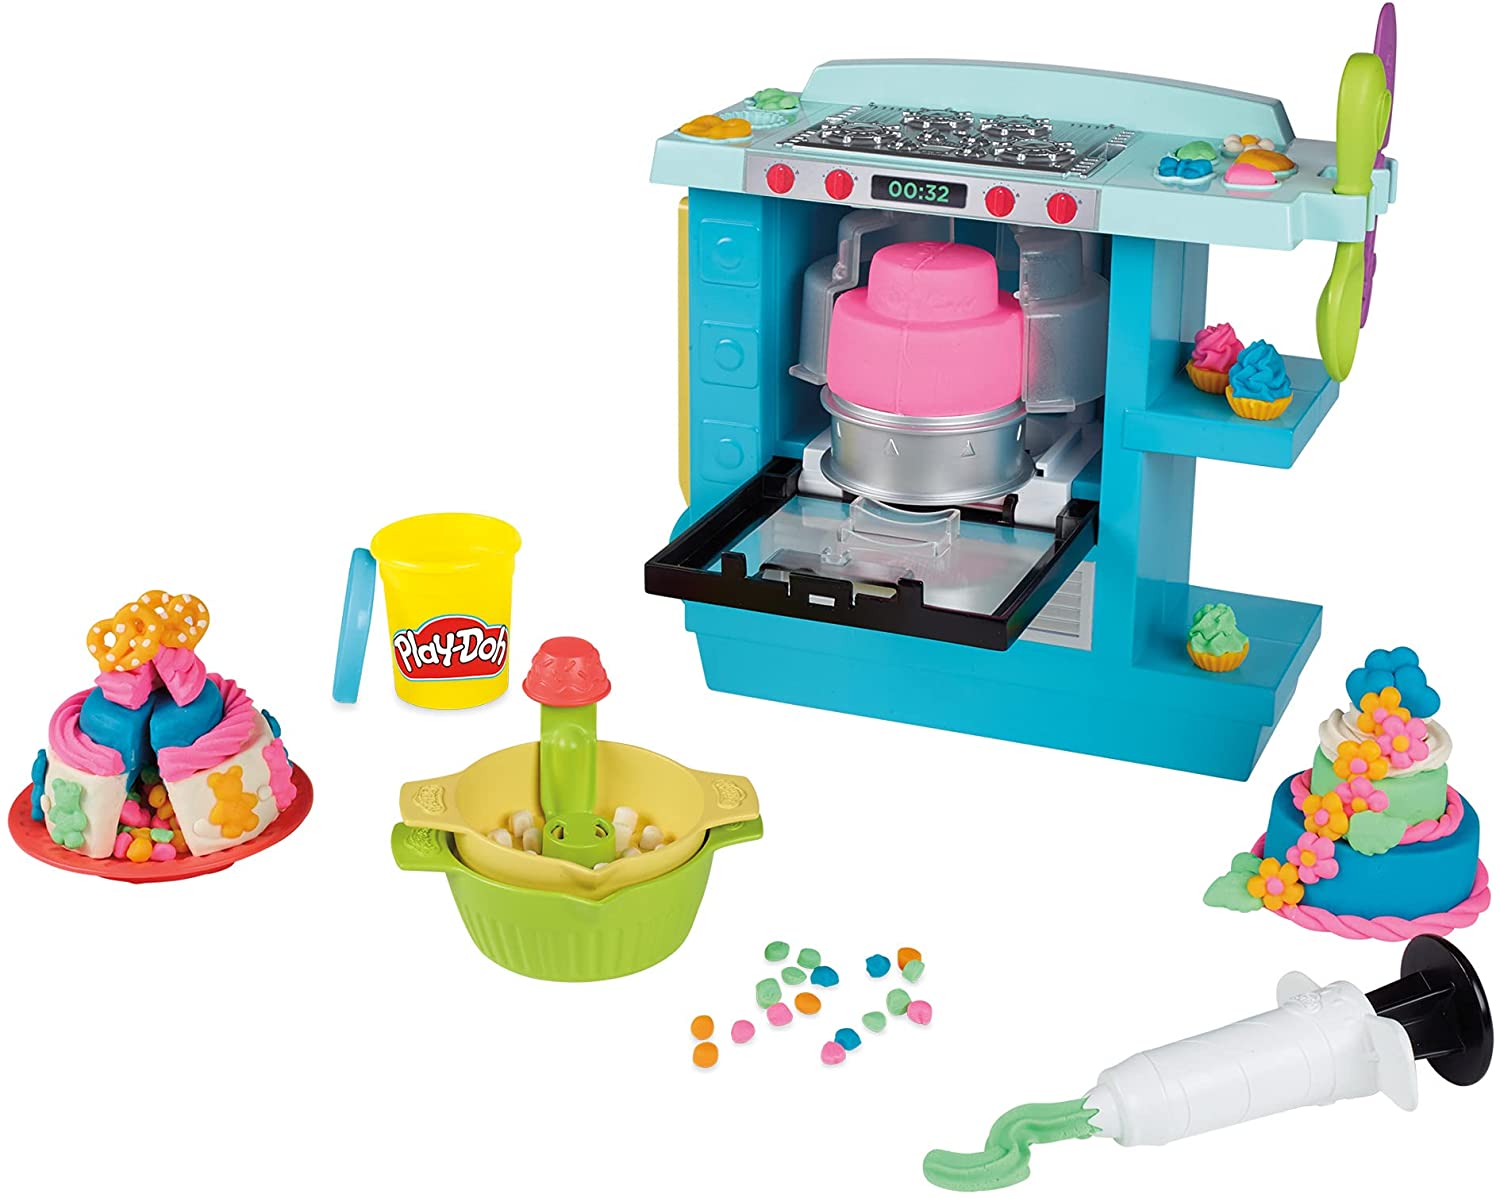 Play-Doh - Rising Cake Oven Playset (F1321)